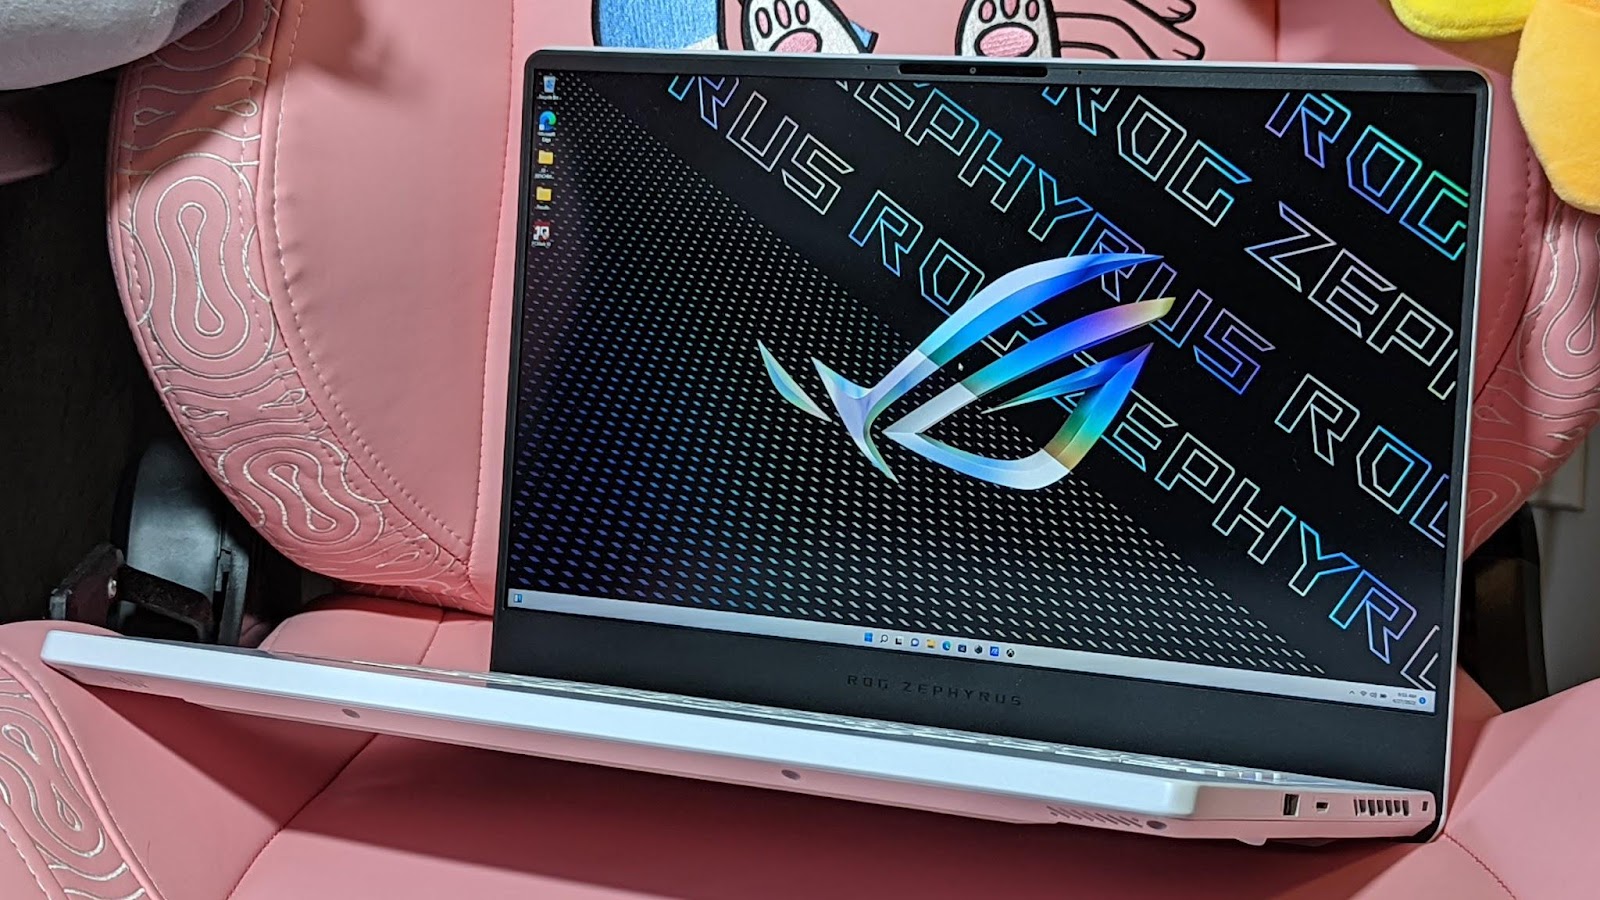 This image shows the ASUS ROG Zephyrus G15 2022 under the sunshine.